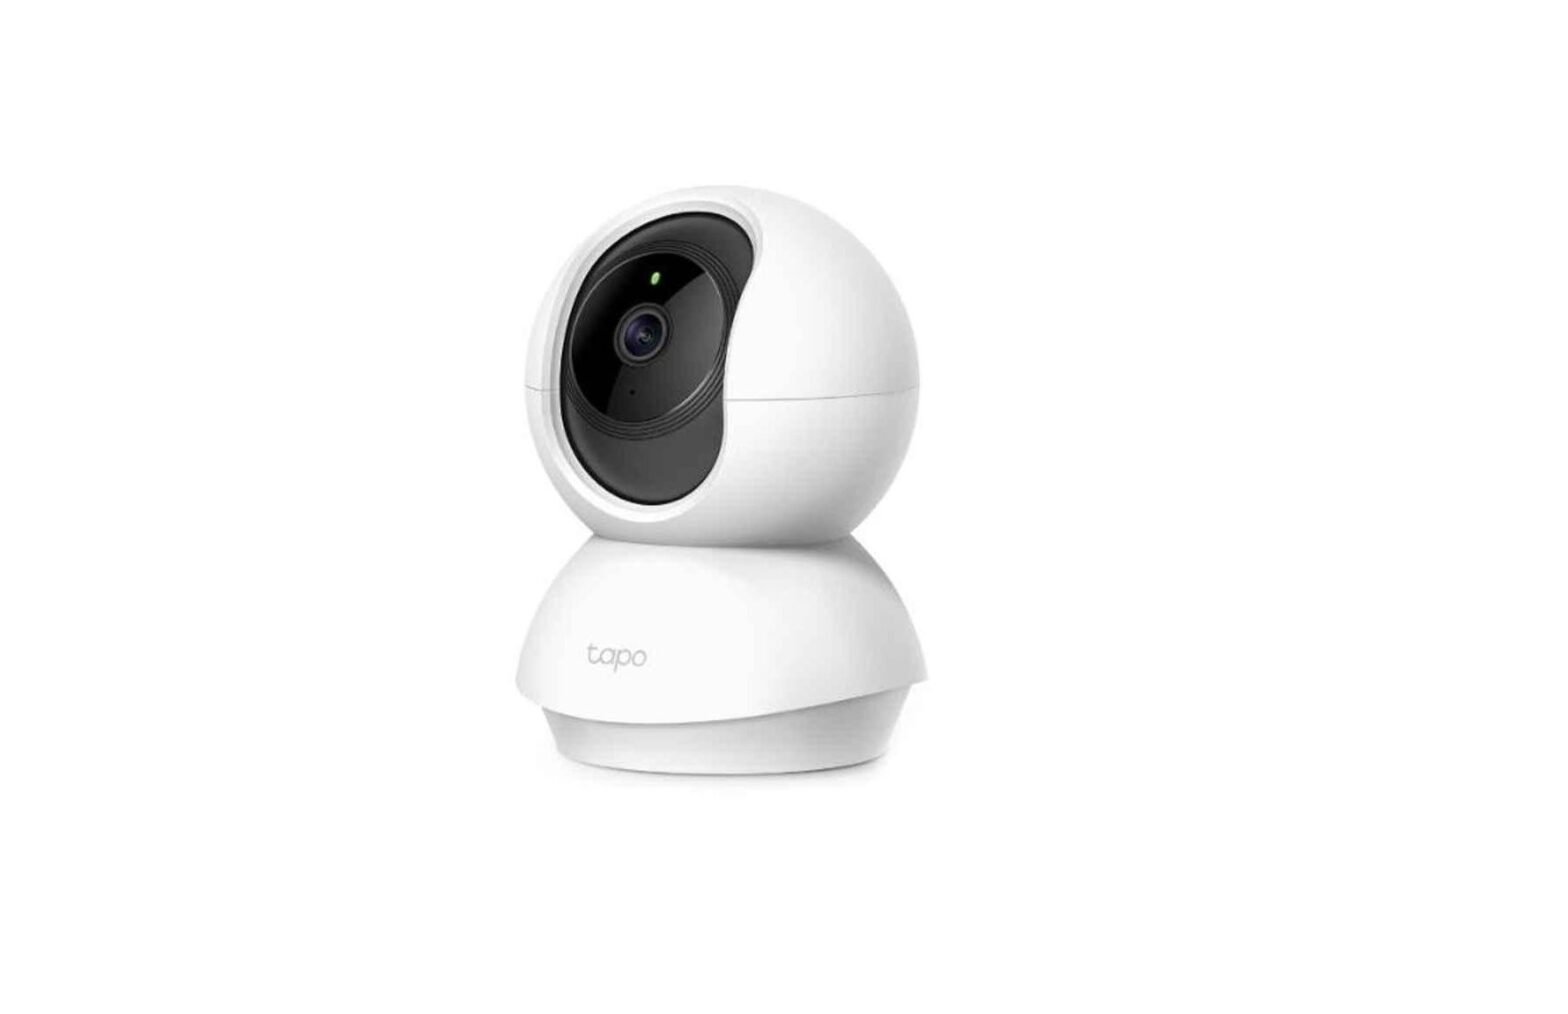 tp-link C200 Pan-Tilt Home Security Wi-Fi Camera User Guide - Featured image